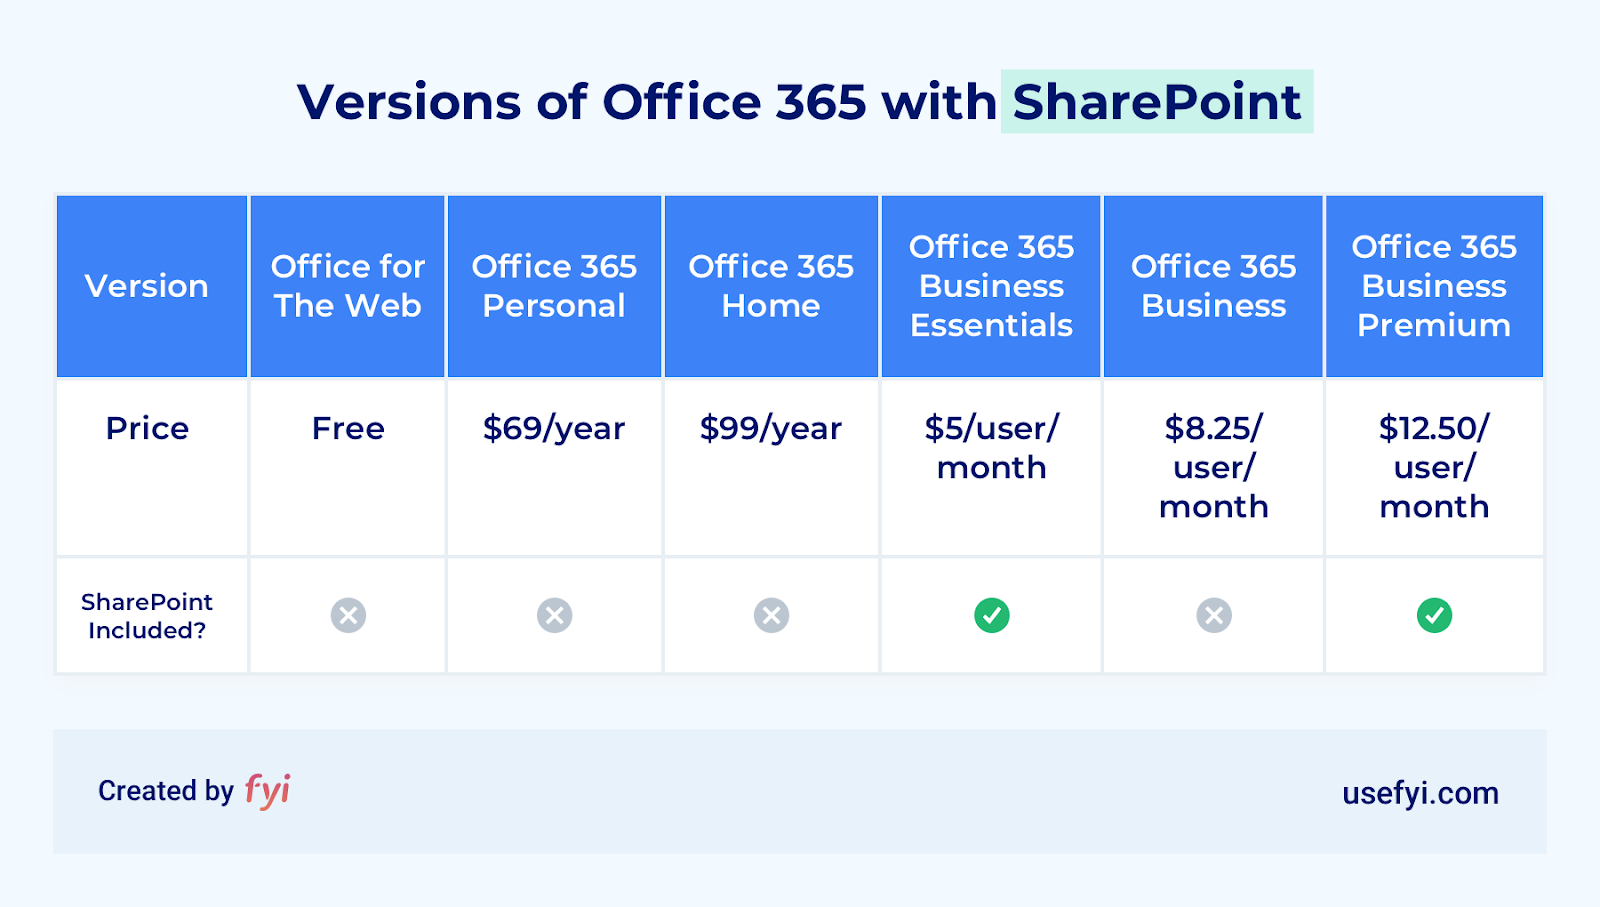 Is Sharepoint Included In Office 365 Business?